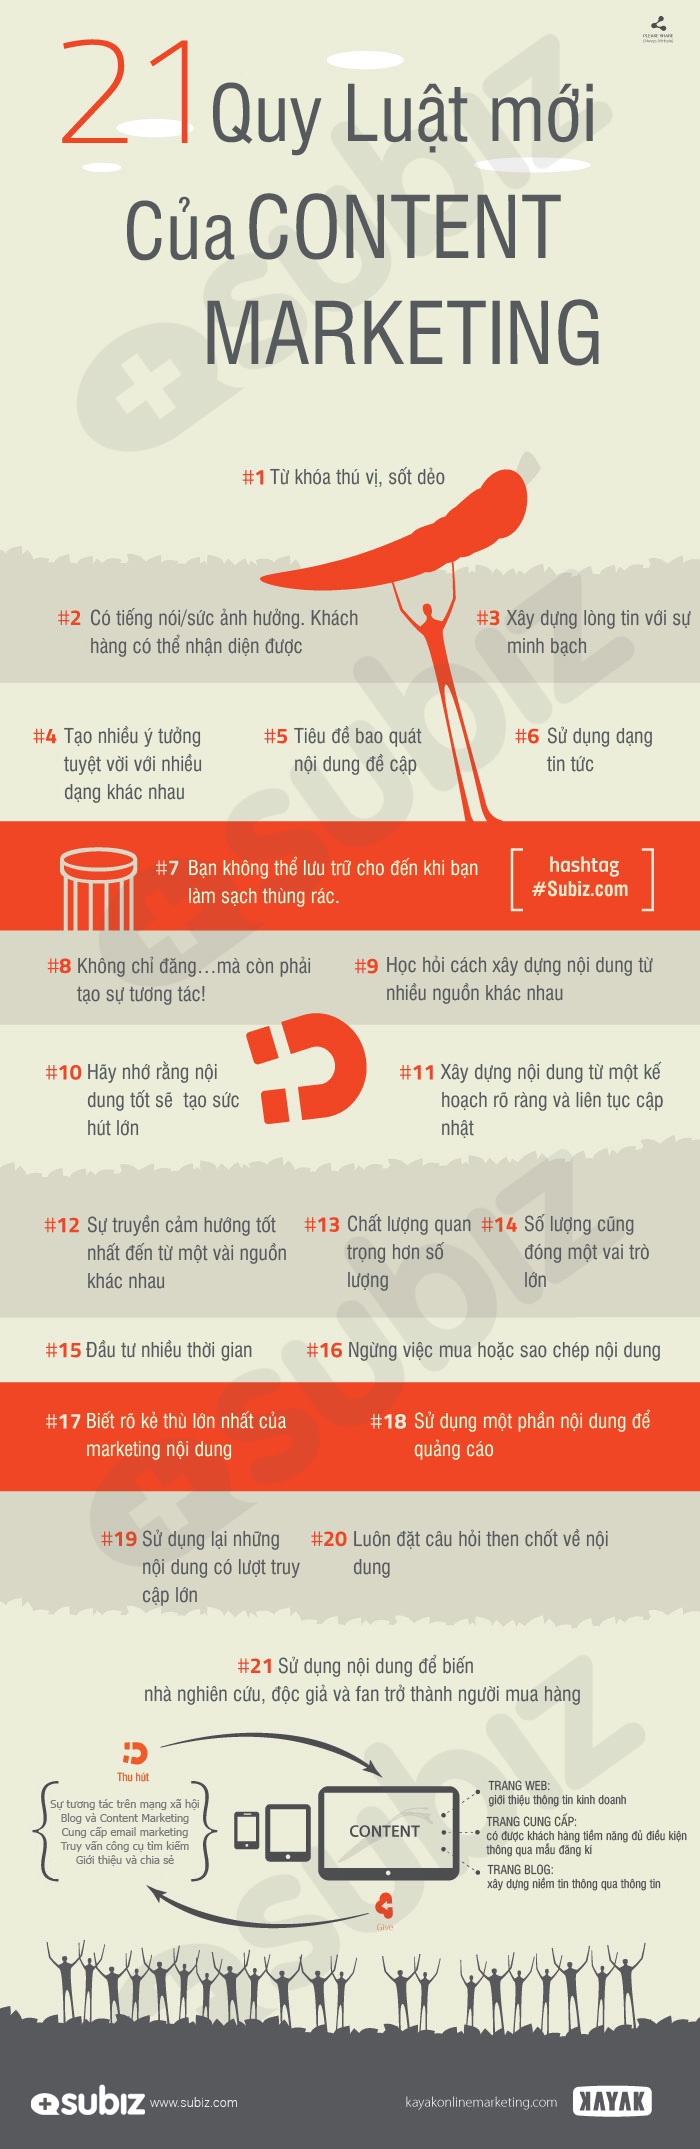 21 quy luat lam content marketing nam 2015 hinh anh 